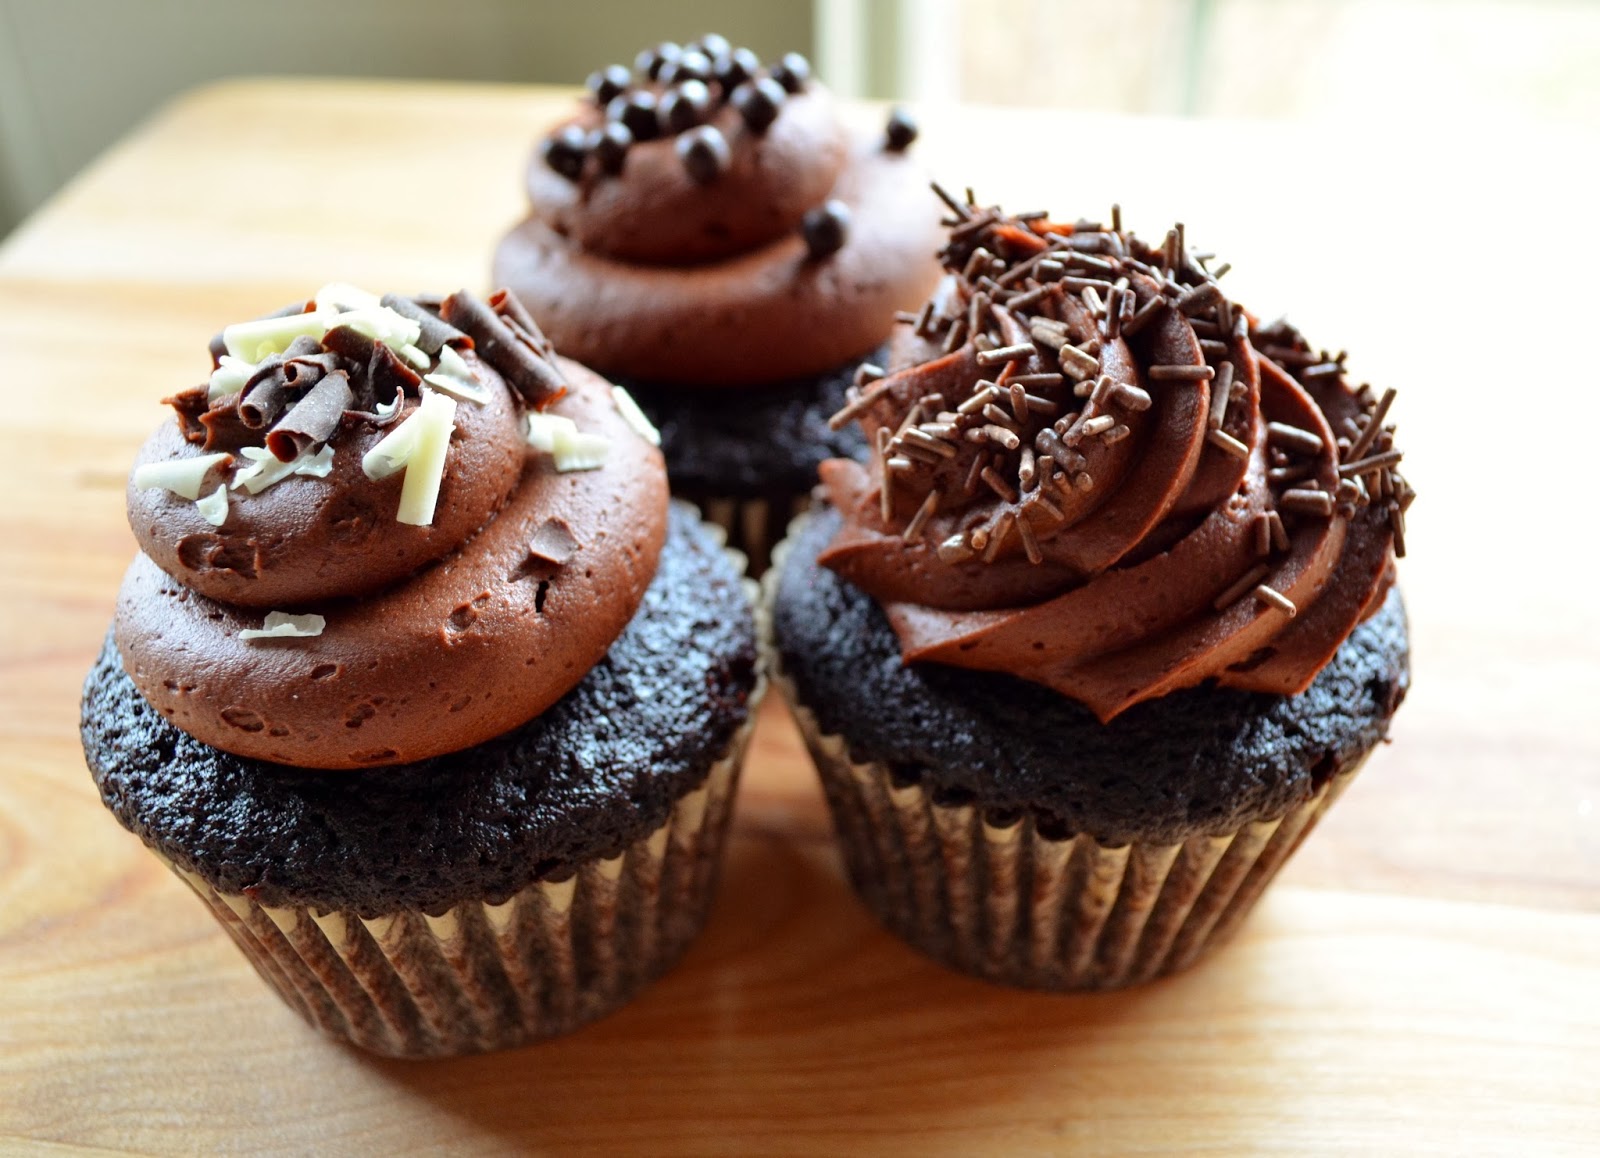 Chocolate Cupcakes with Buttercream Frosting